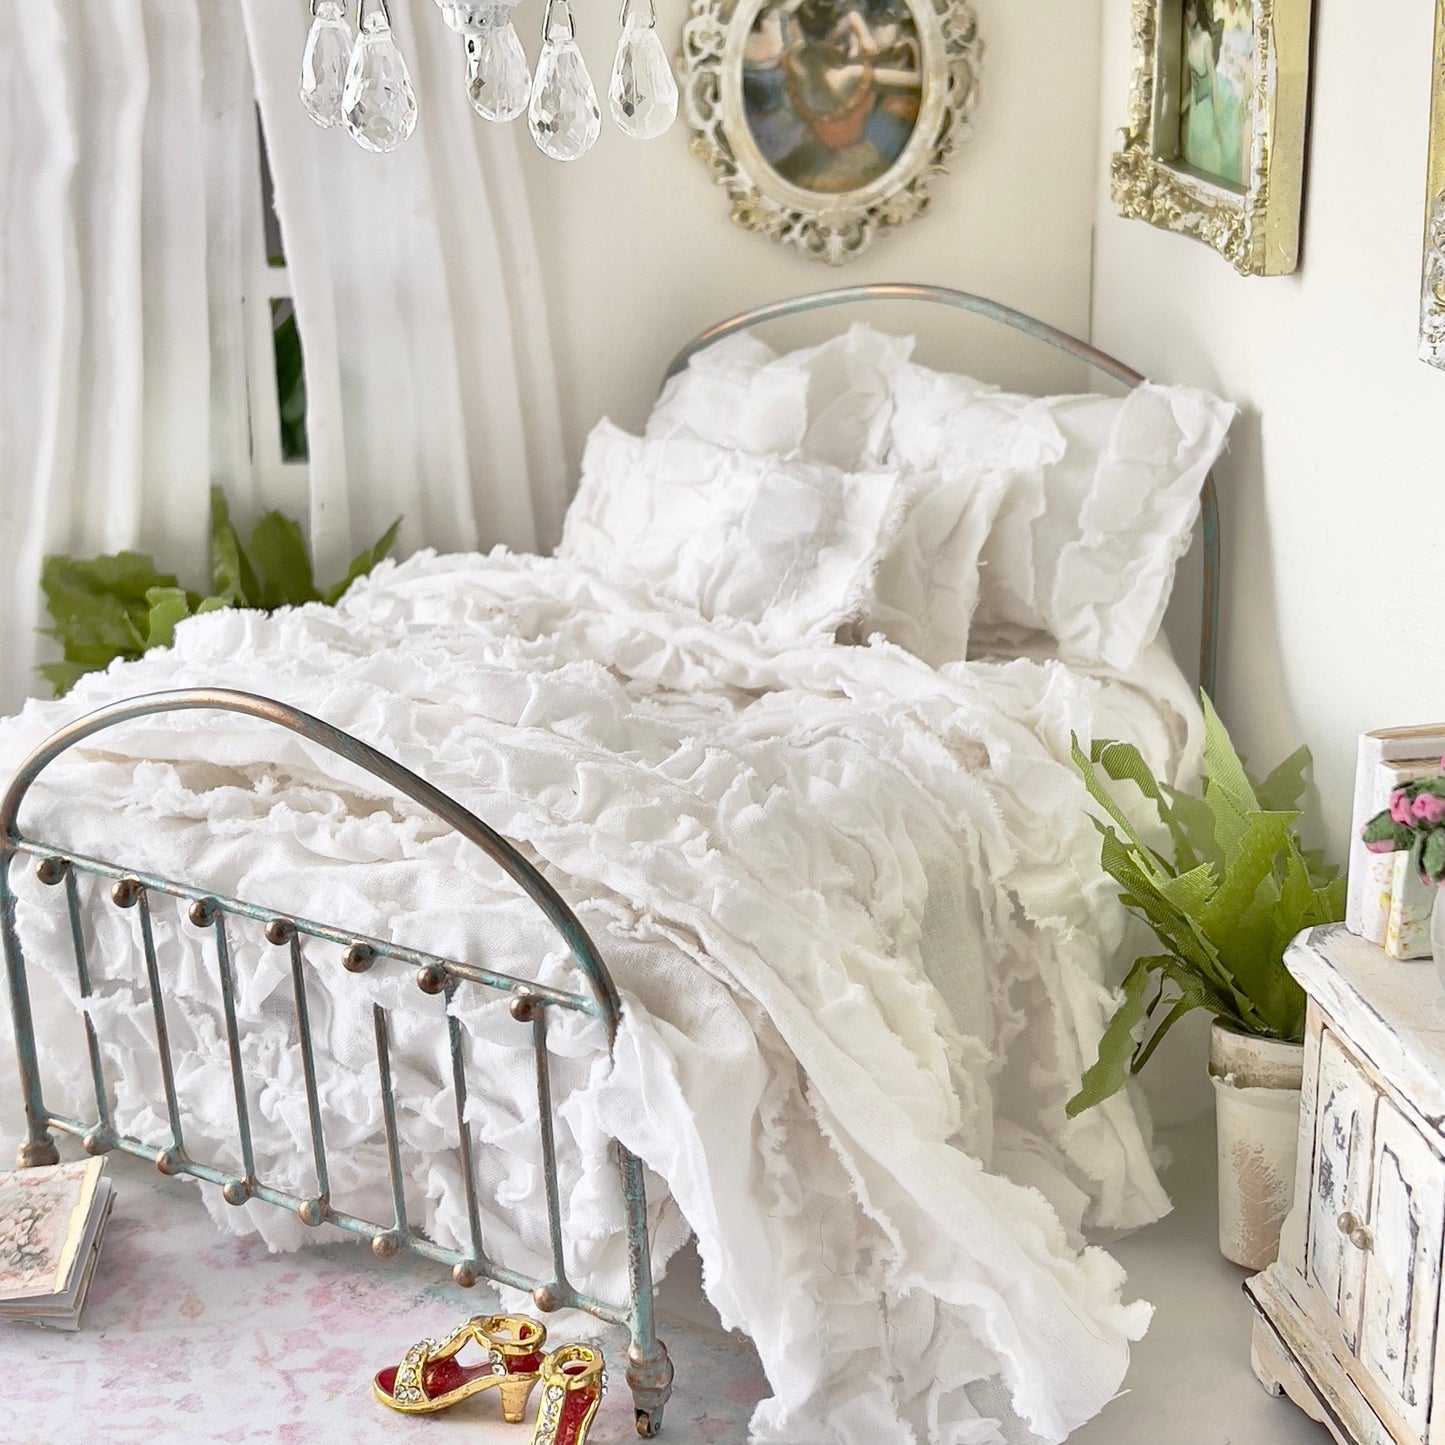 Chantallena White Bed Linens single/twin (8 in by 11 in) Boundless White | White Distressed Ruffled Cotton  | Leanna